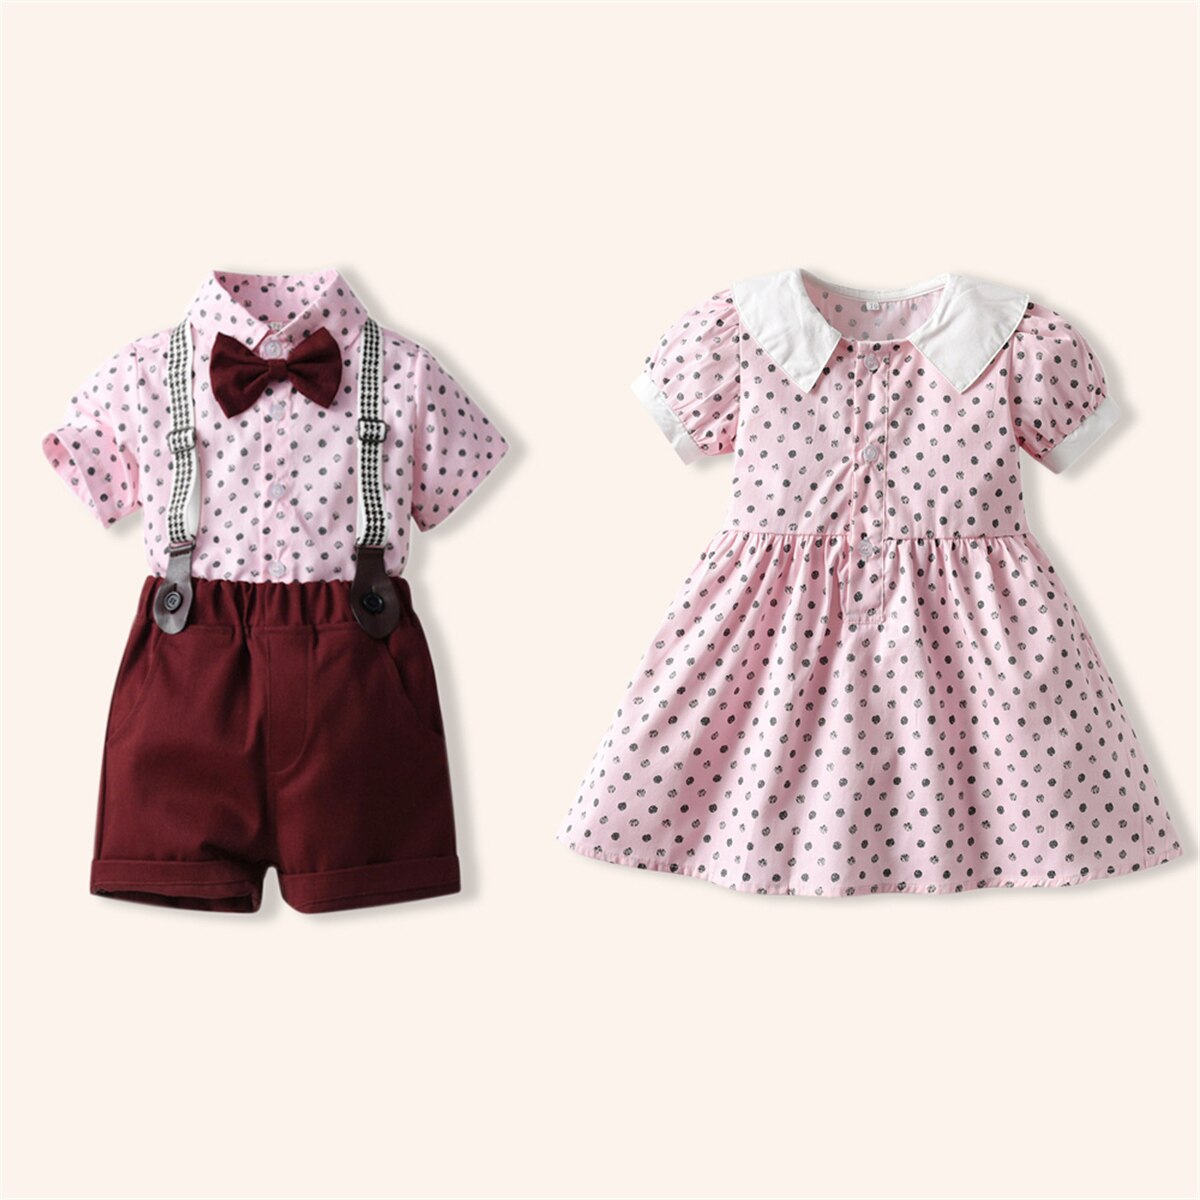 hibobi Floral Print Short Sleeve Dress & Blouse and Shorts Suit for Brother and Sister